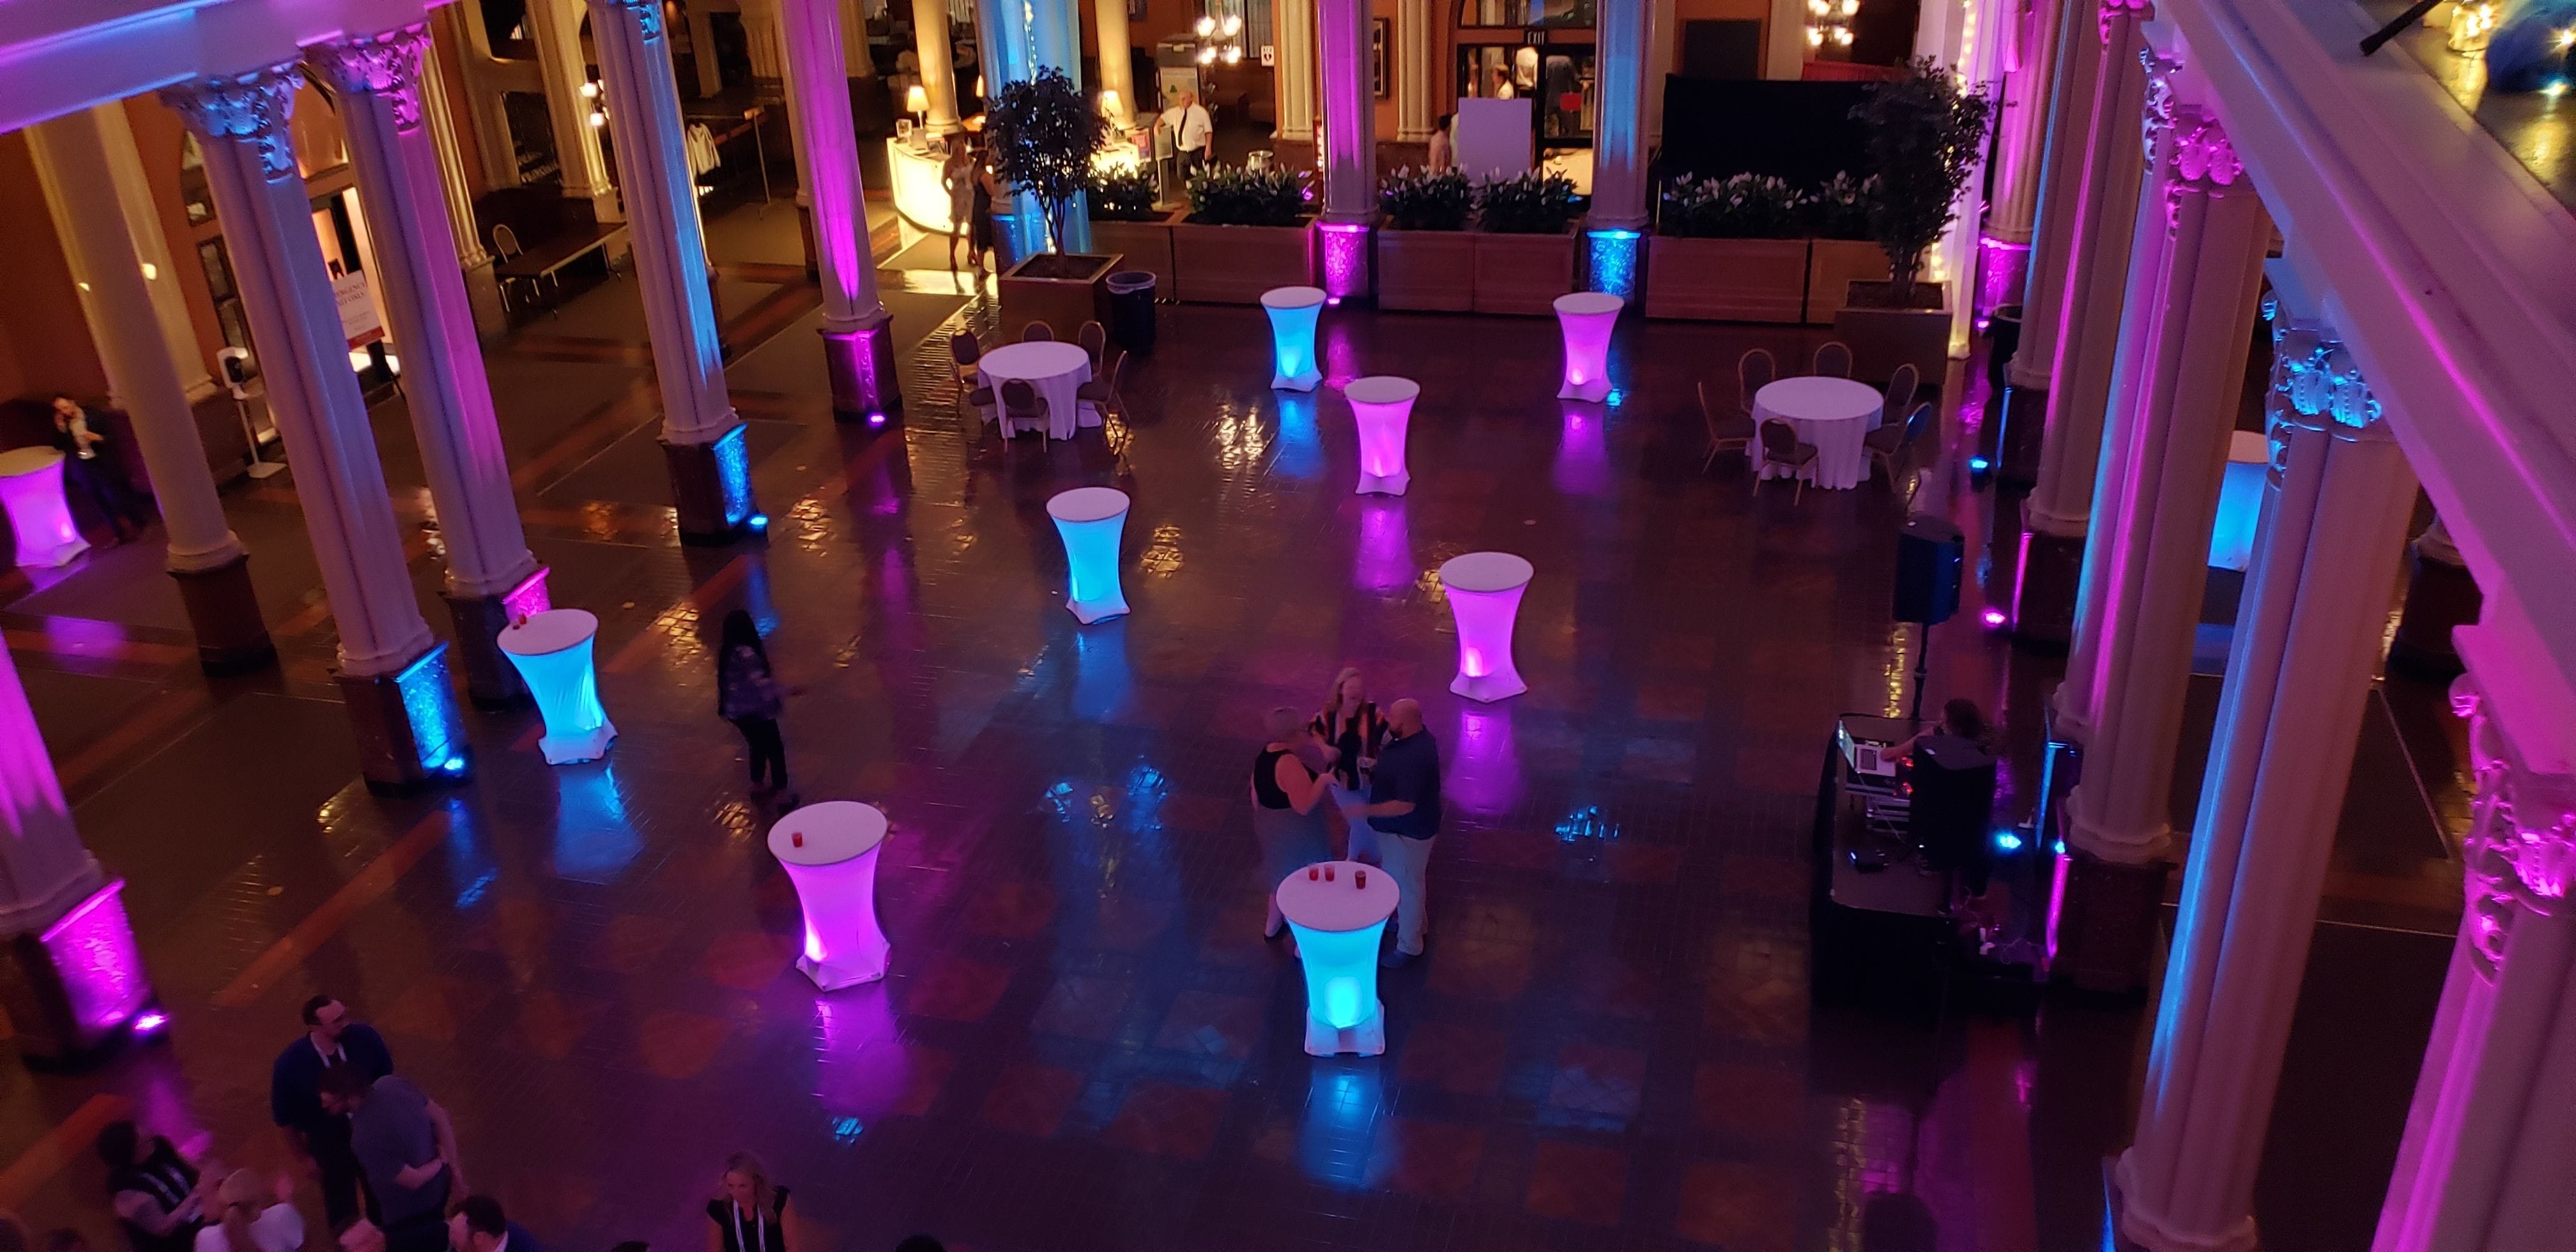 Event lighting at the Landmark Center in St. Paul with glowing cocktail tables.